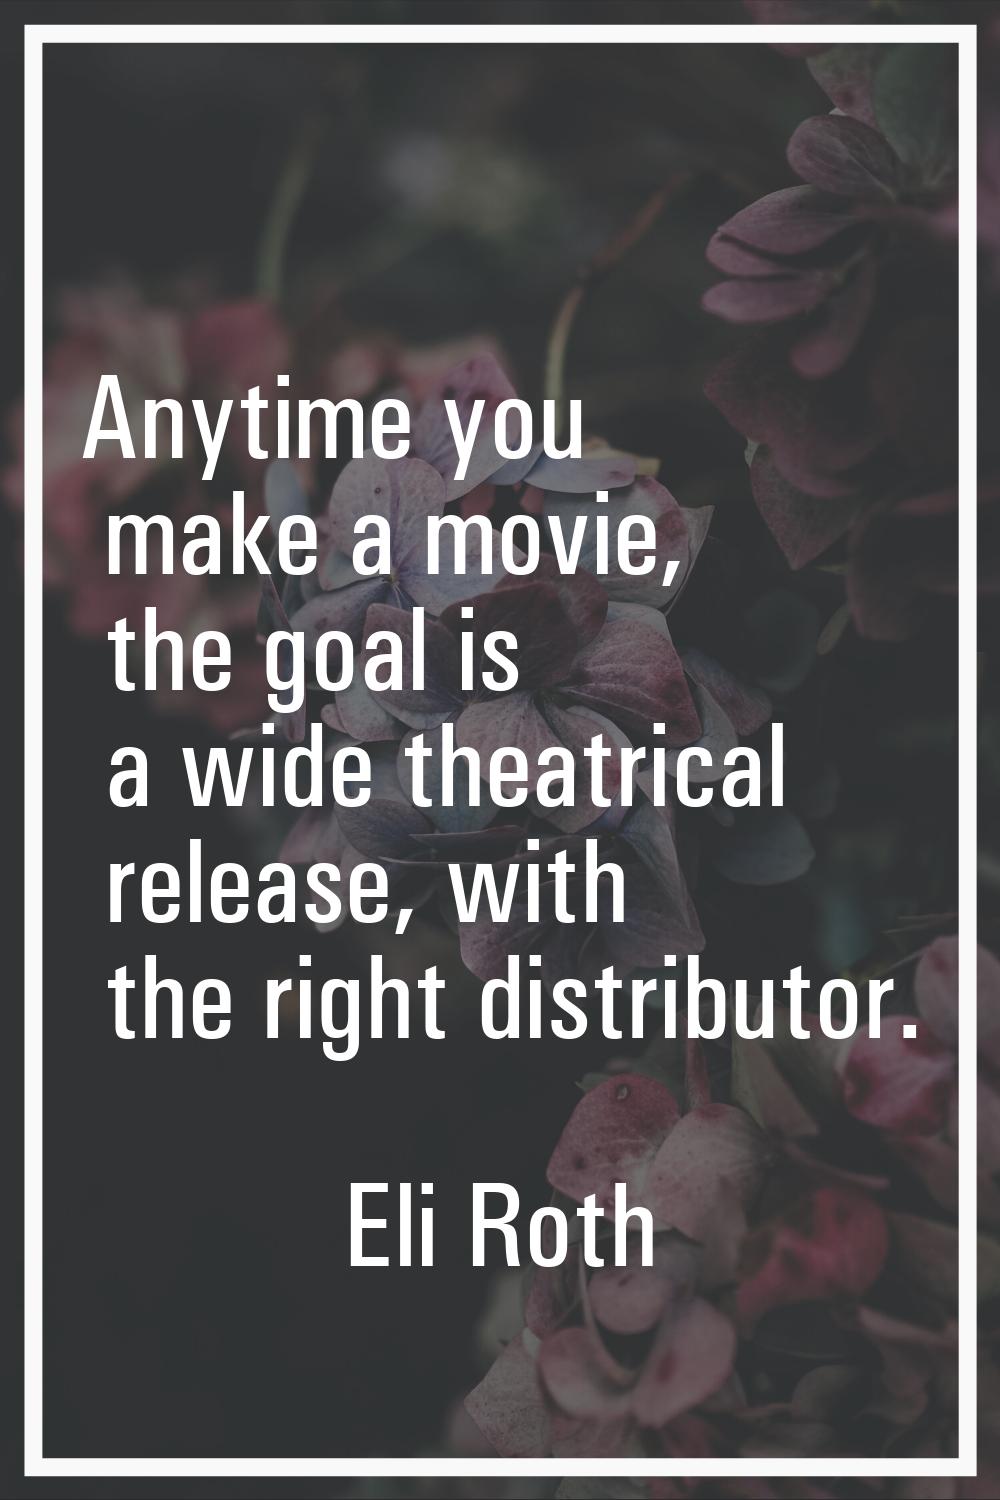 Anytime you make a movie, the goal is a wide theatrical release, with the right distributor.